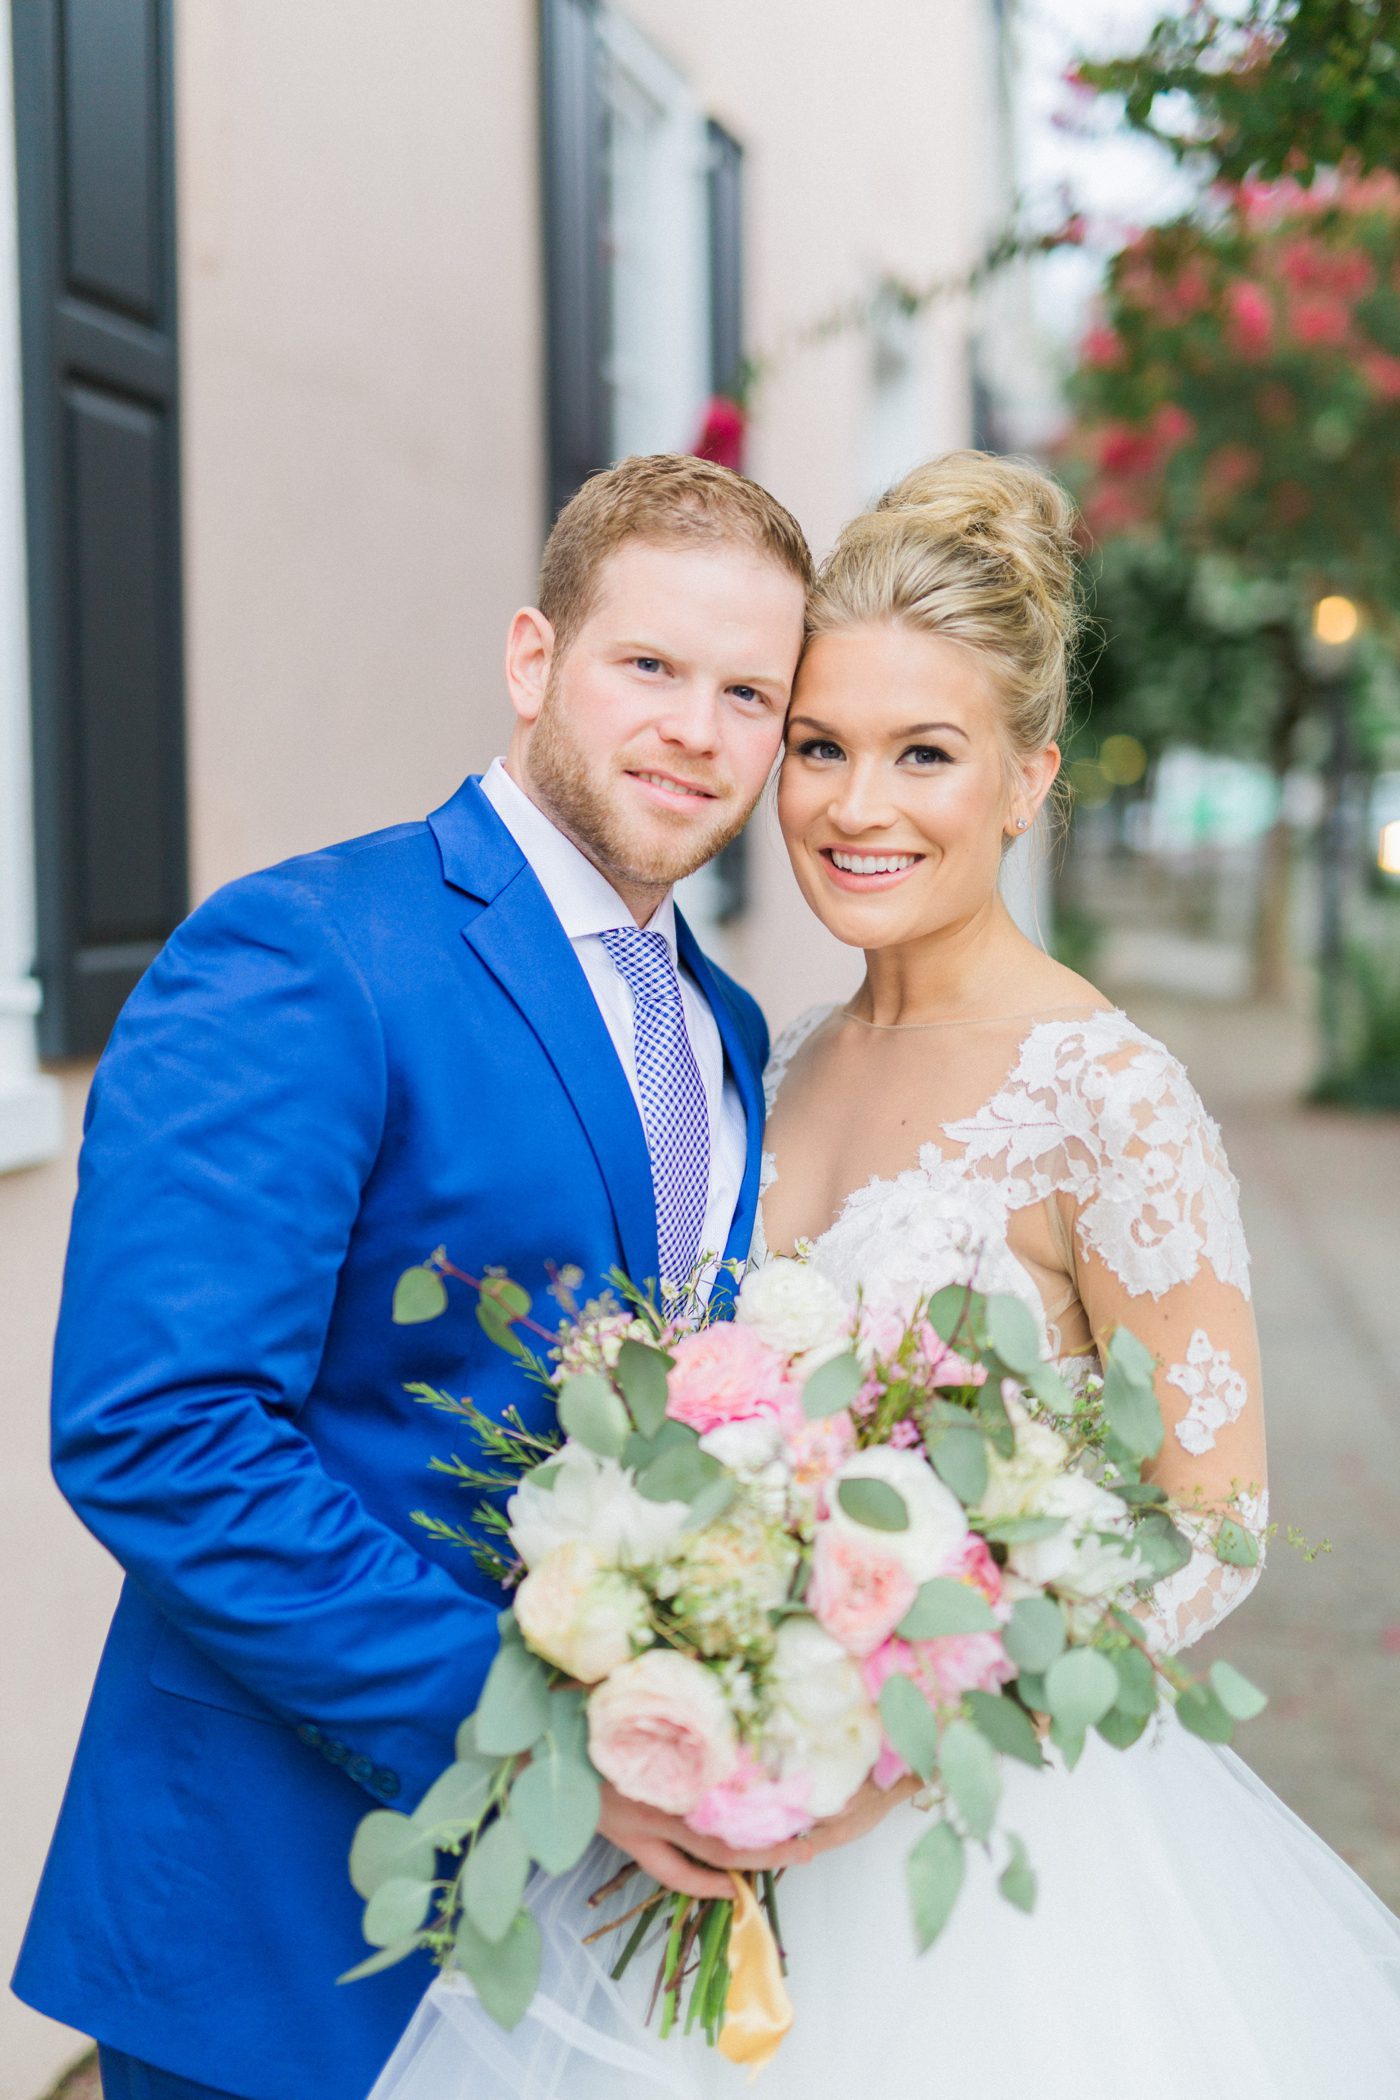 Charleston wedding planners Pure Luxe Bride. Photo by Catherine Ann Photography